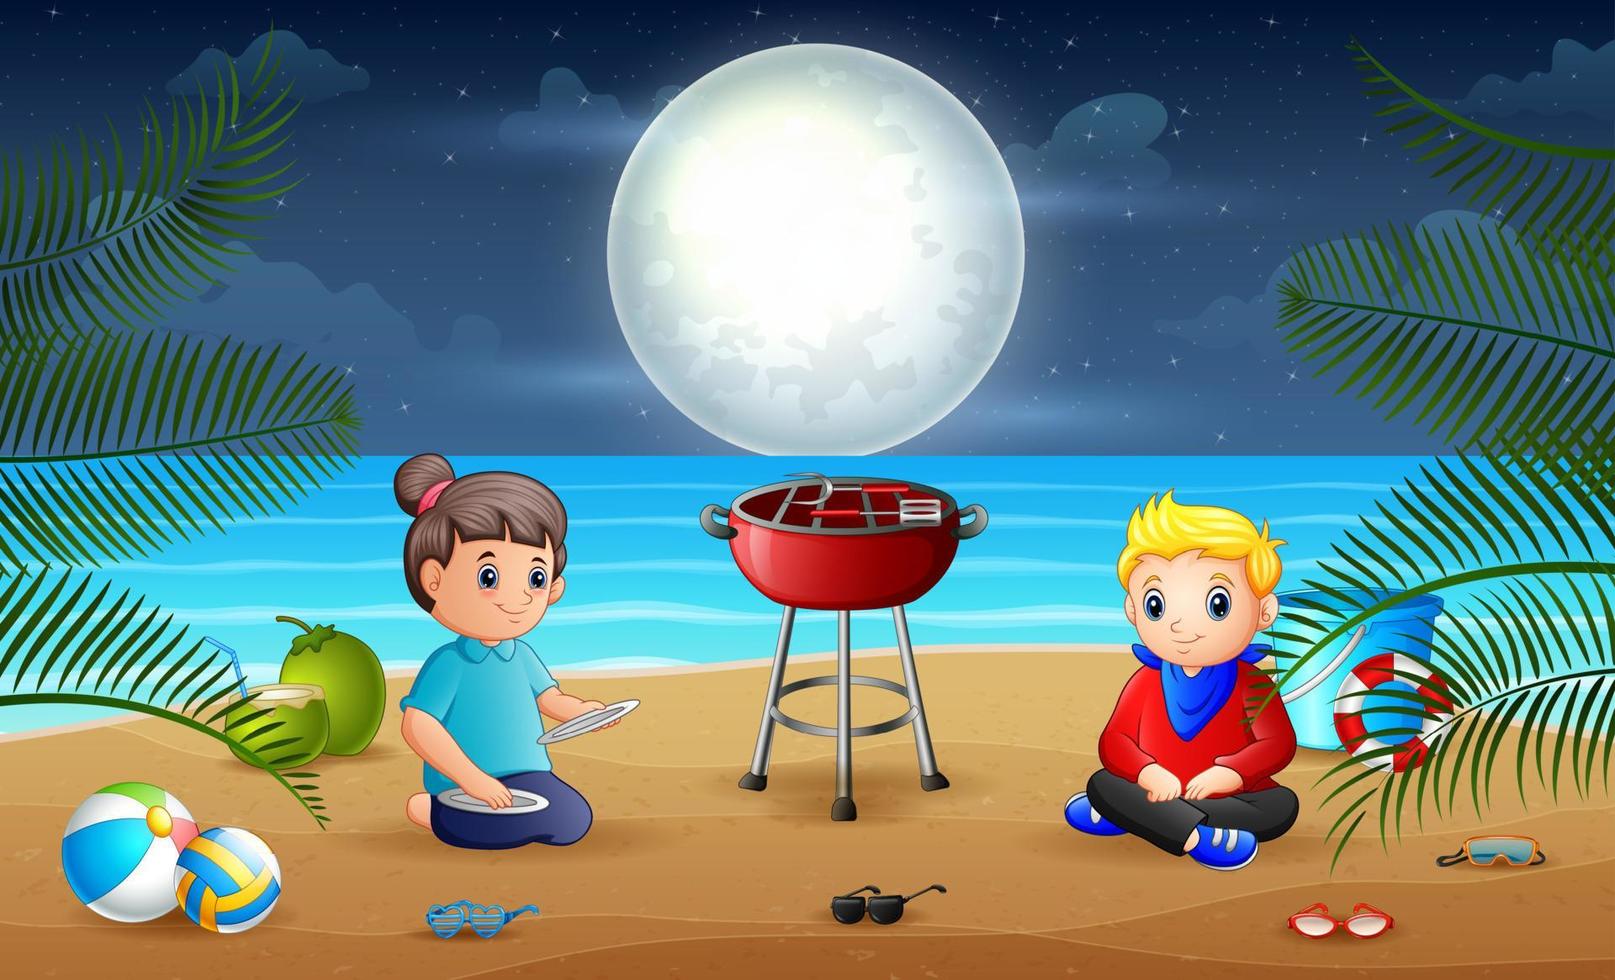 Evening barbeque on the beach illustration vector